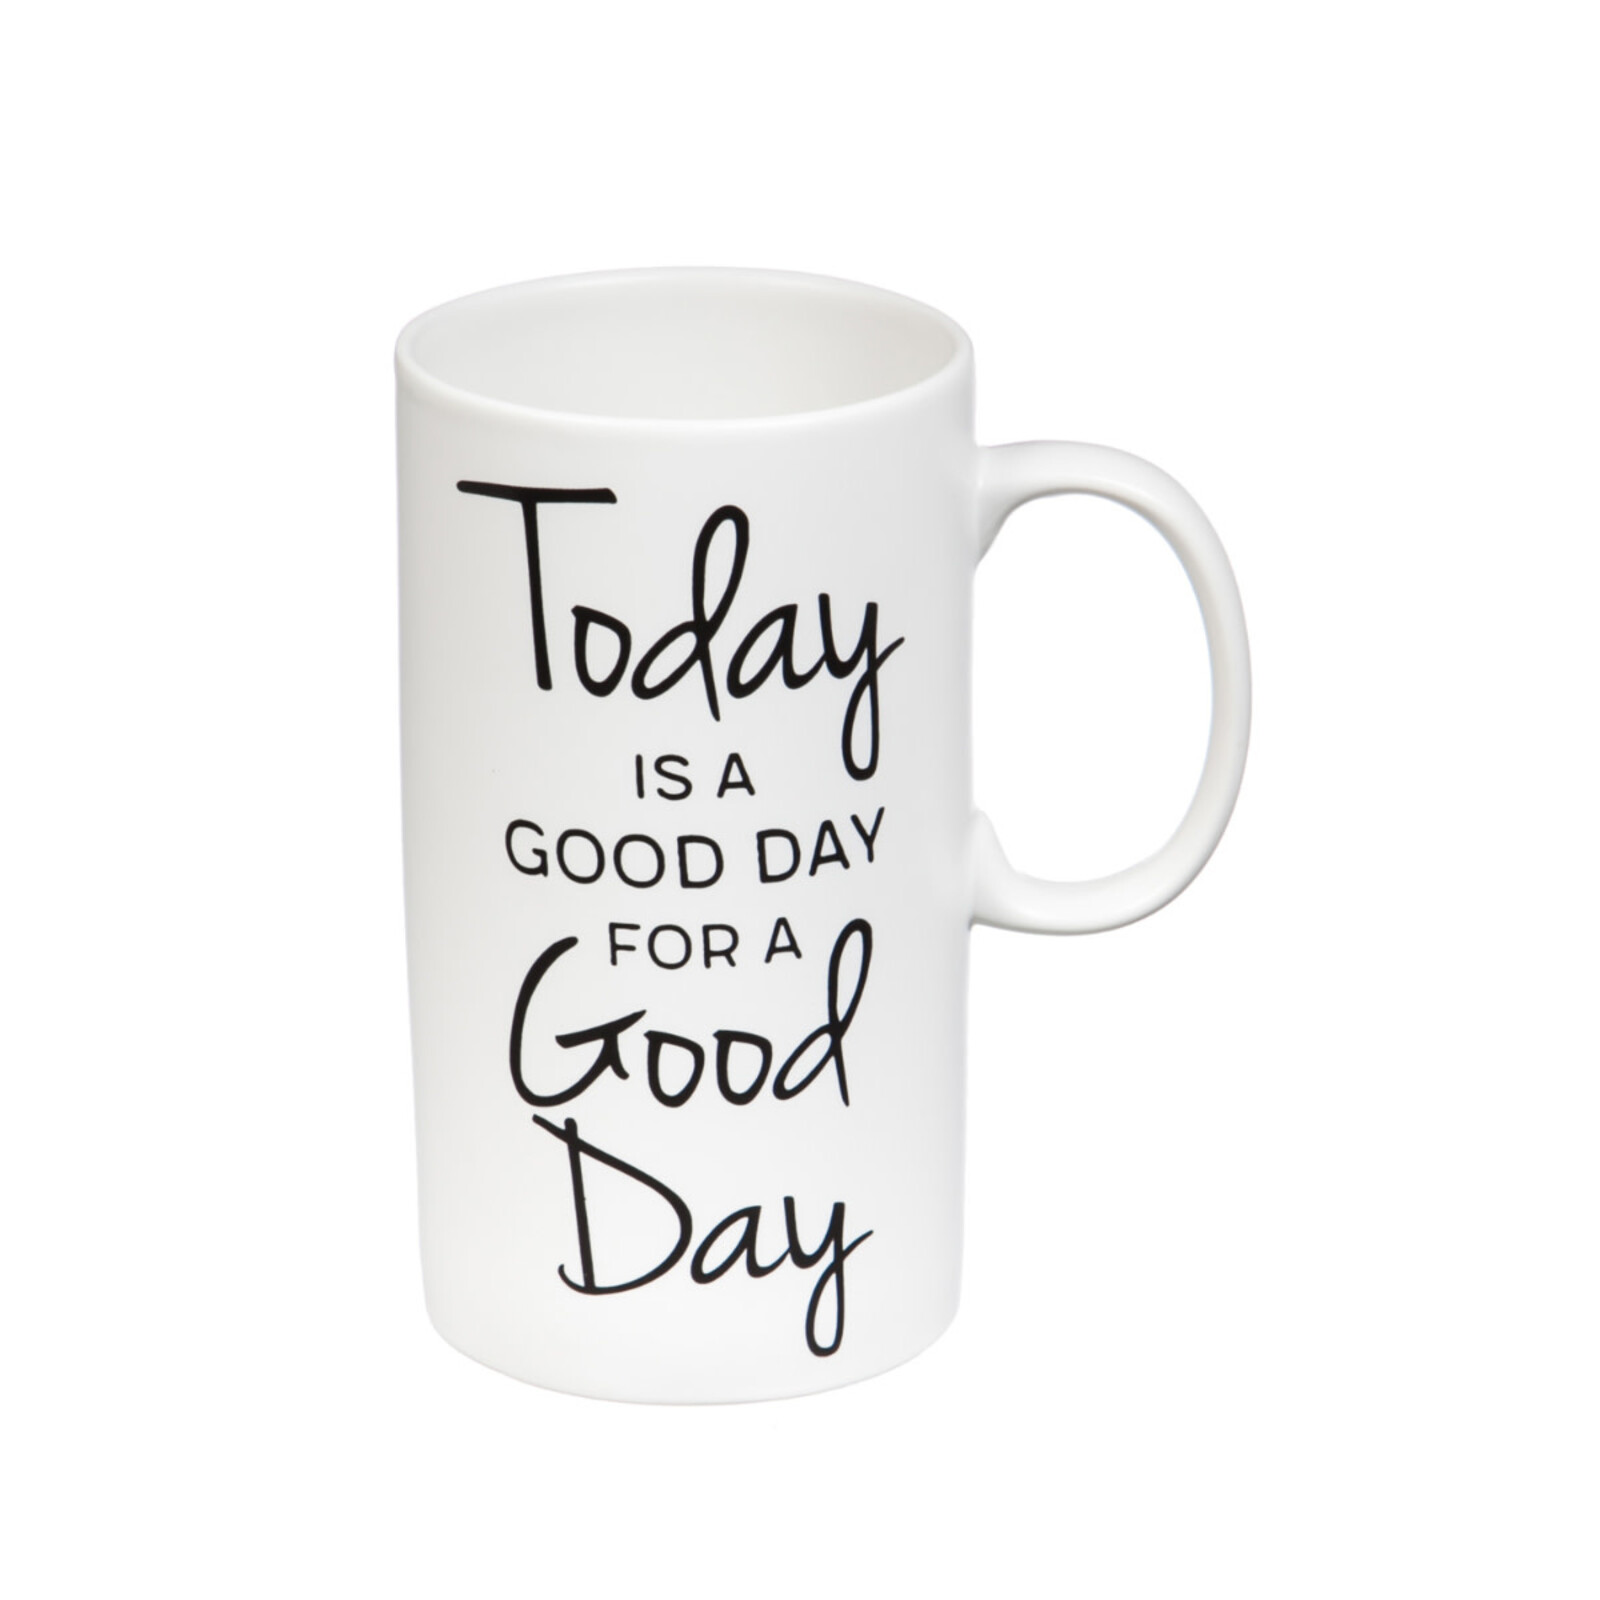 Evergreen Enterprises Ceramic Cup 20 oz Today is a Good Day 3TCT001 loading=